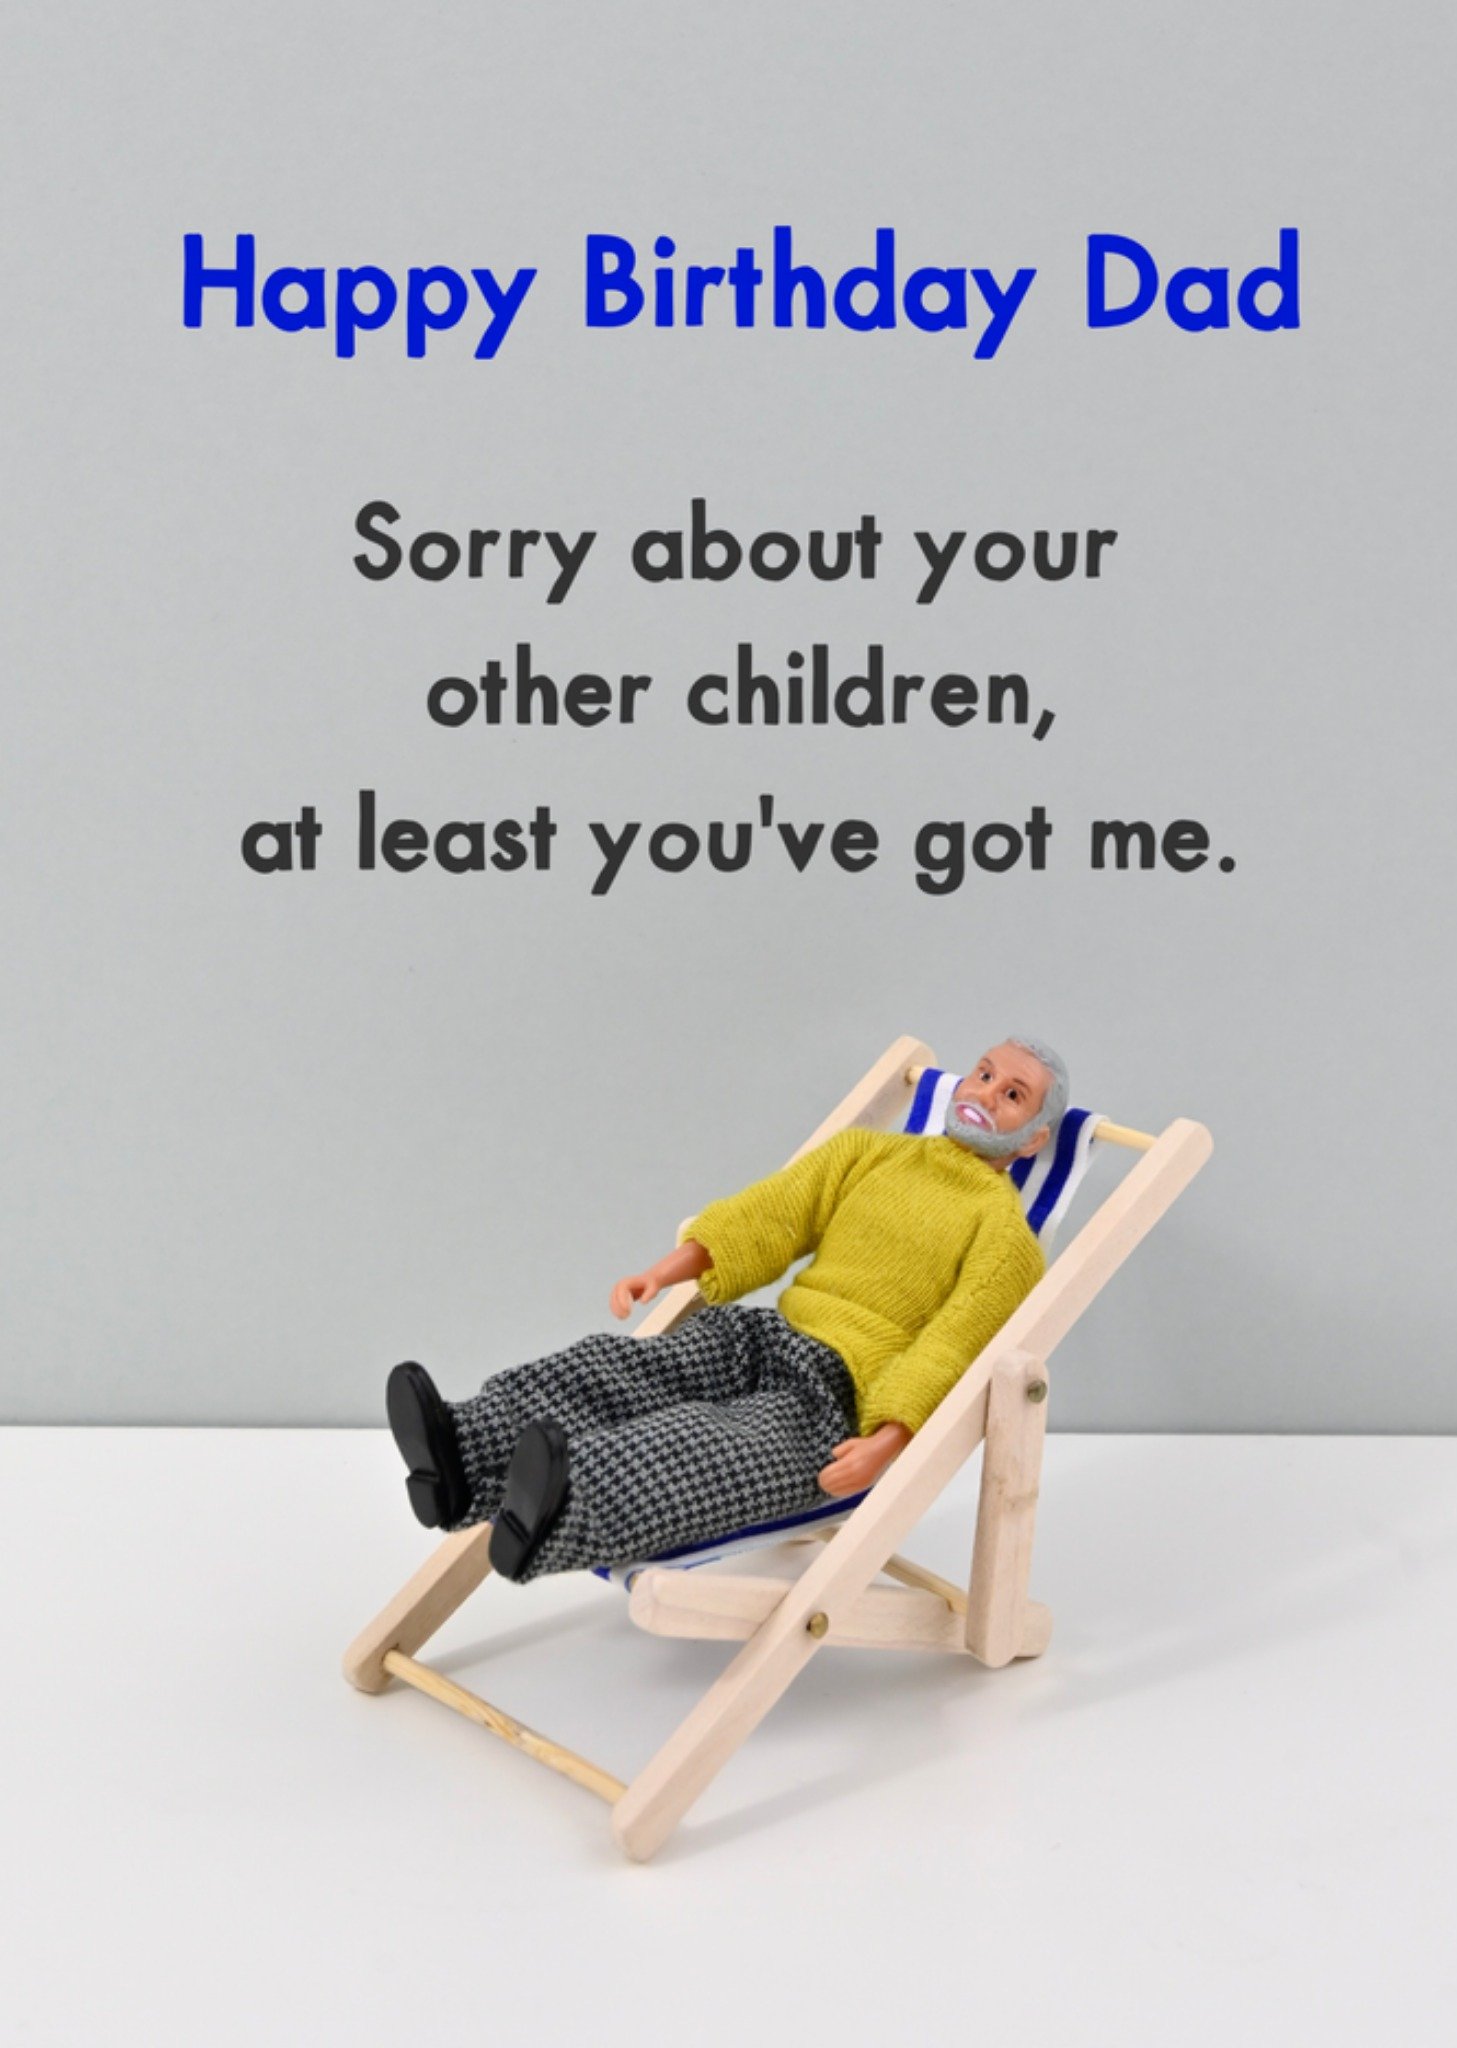 Moonpig Dad Sorry About Your Other Children At Least You've Got Me Deckchair Happy Birthday Card, La